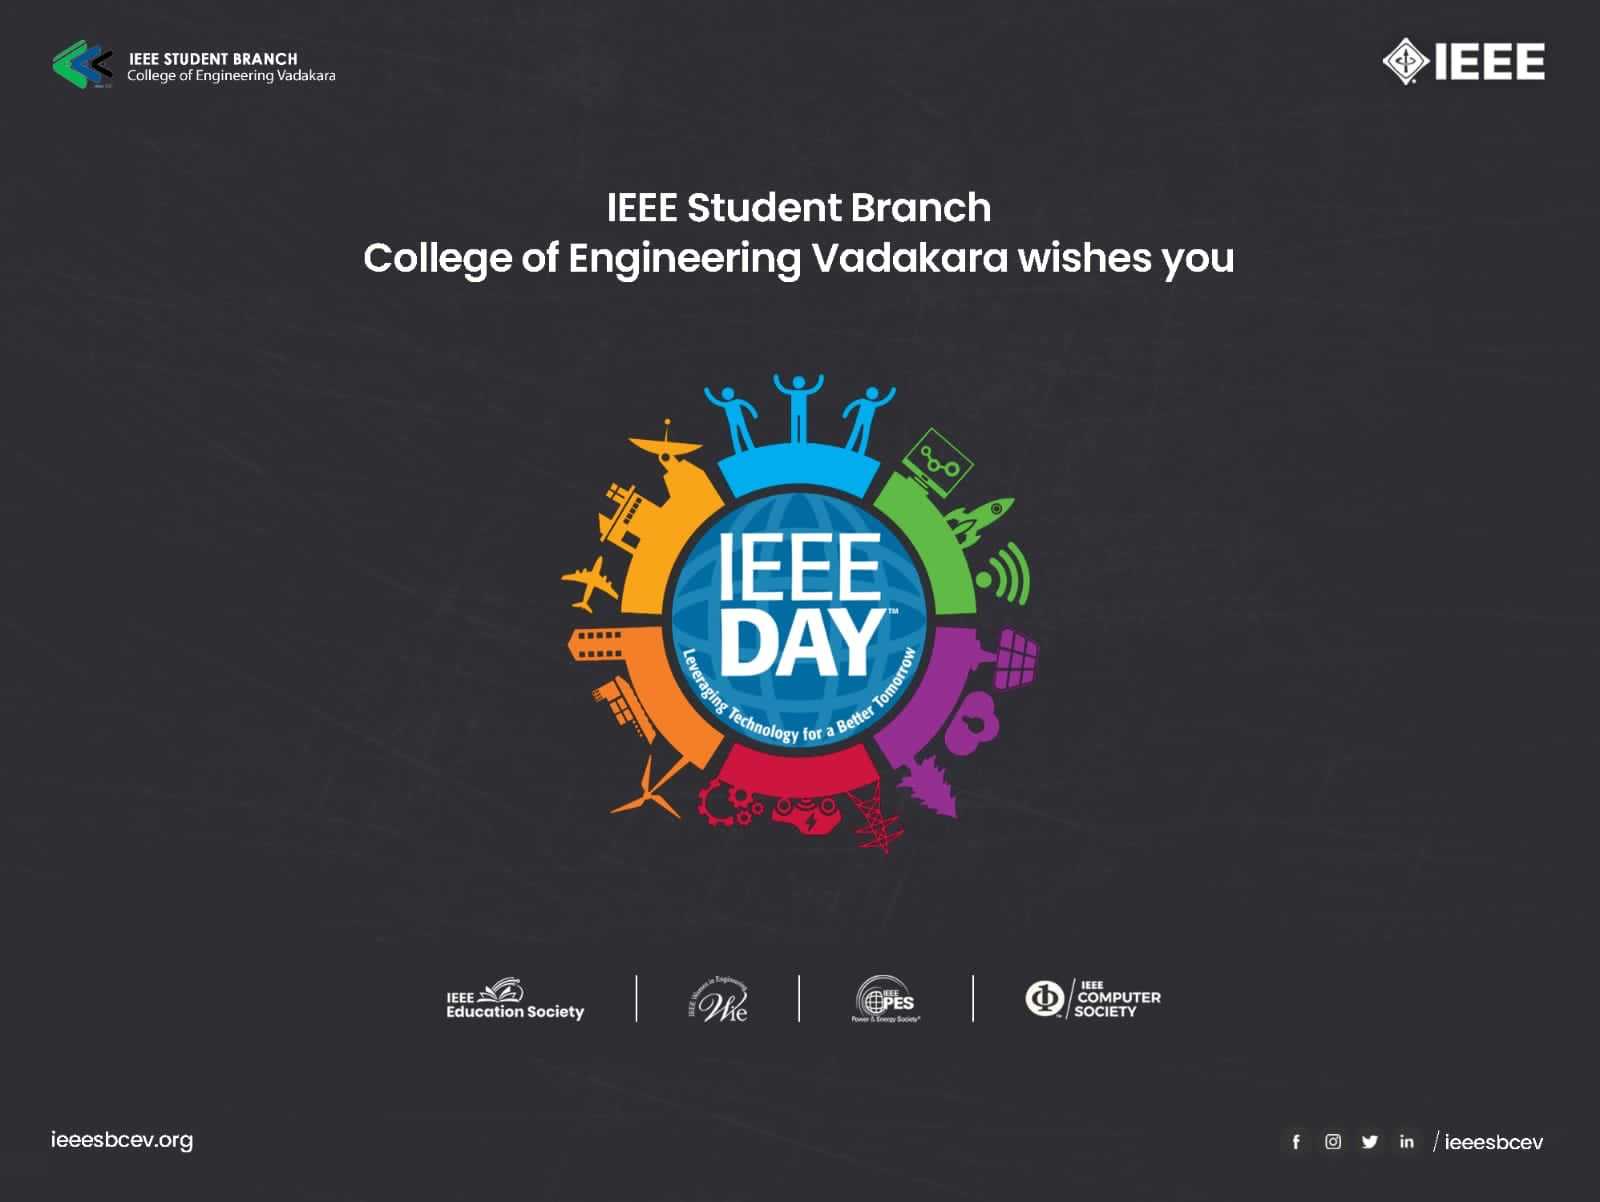 IEEE day